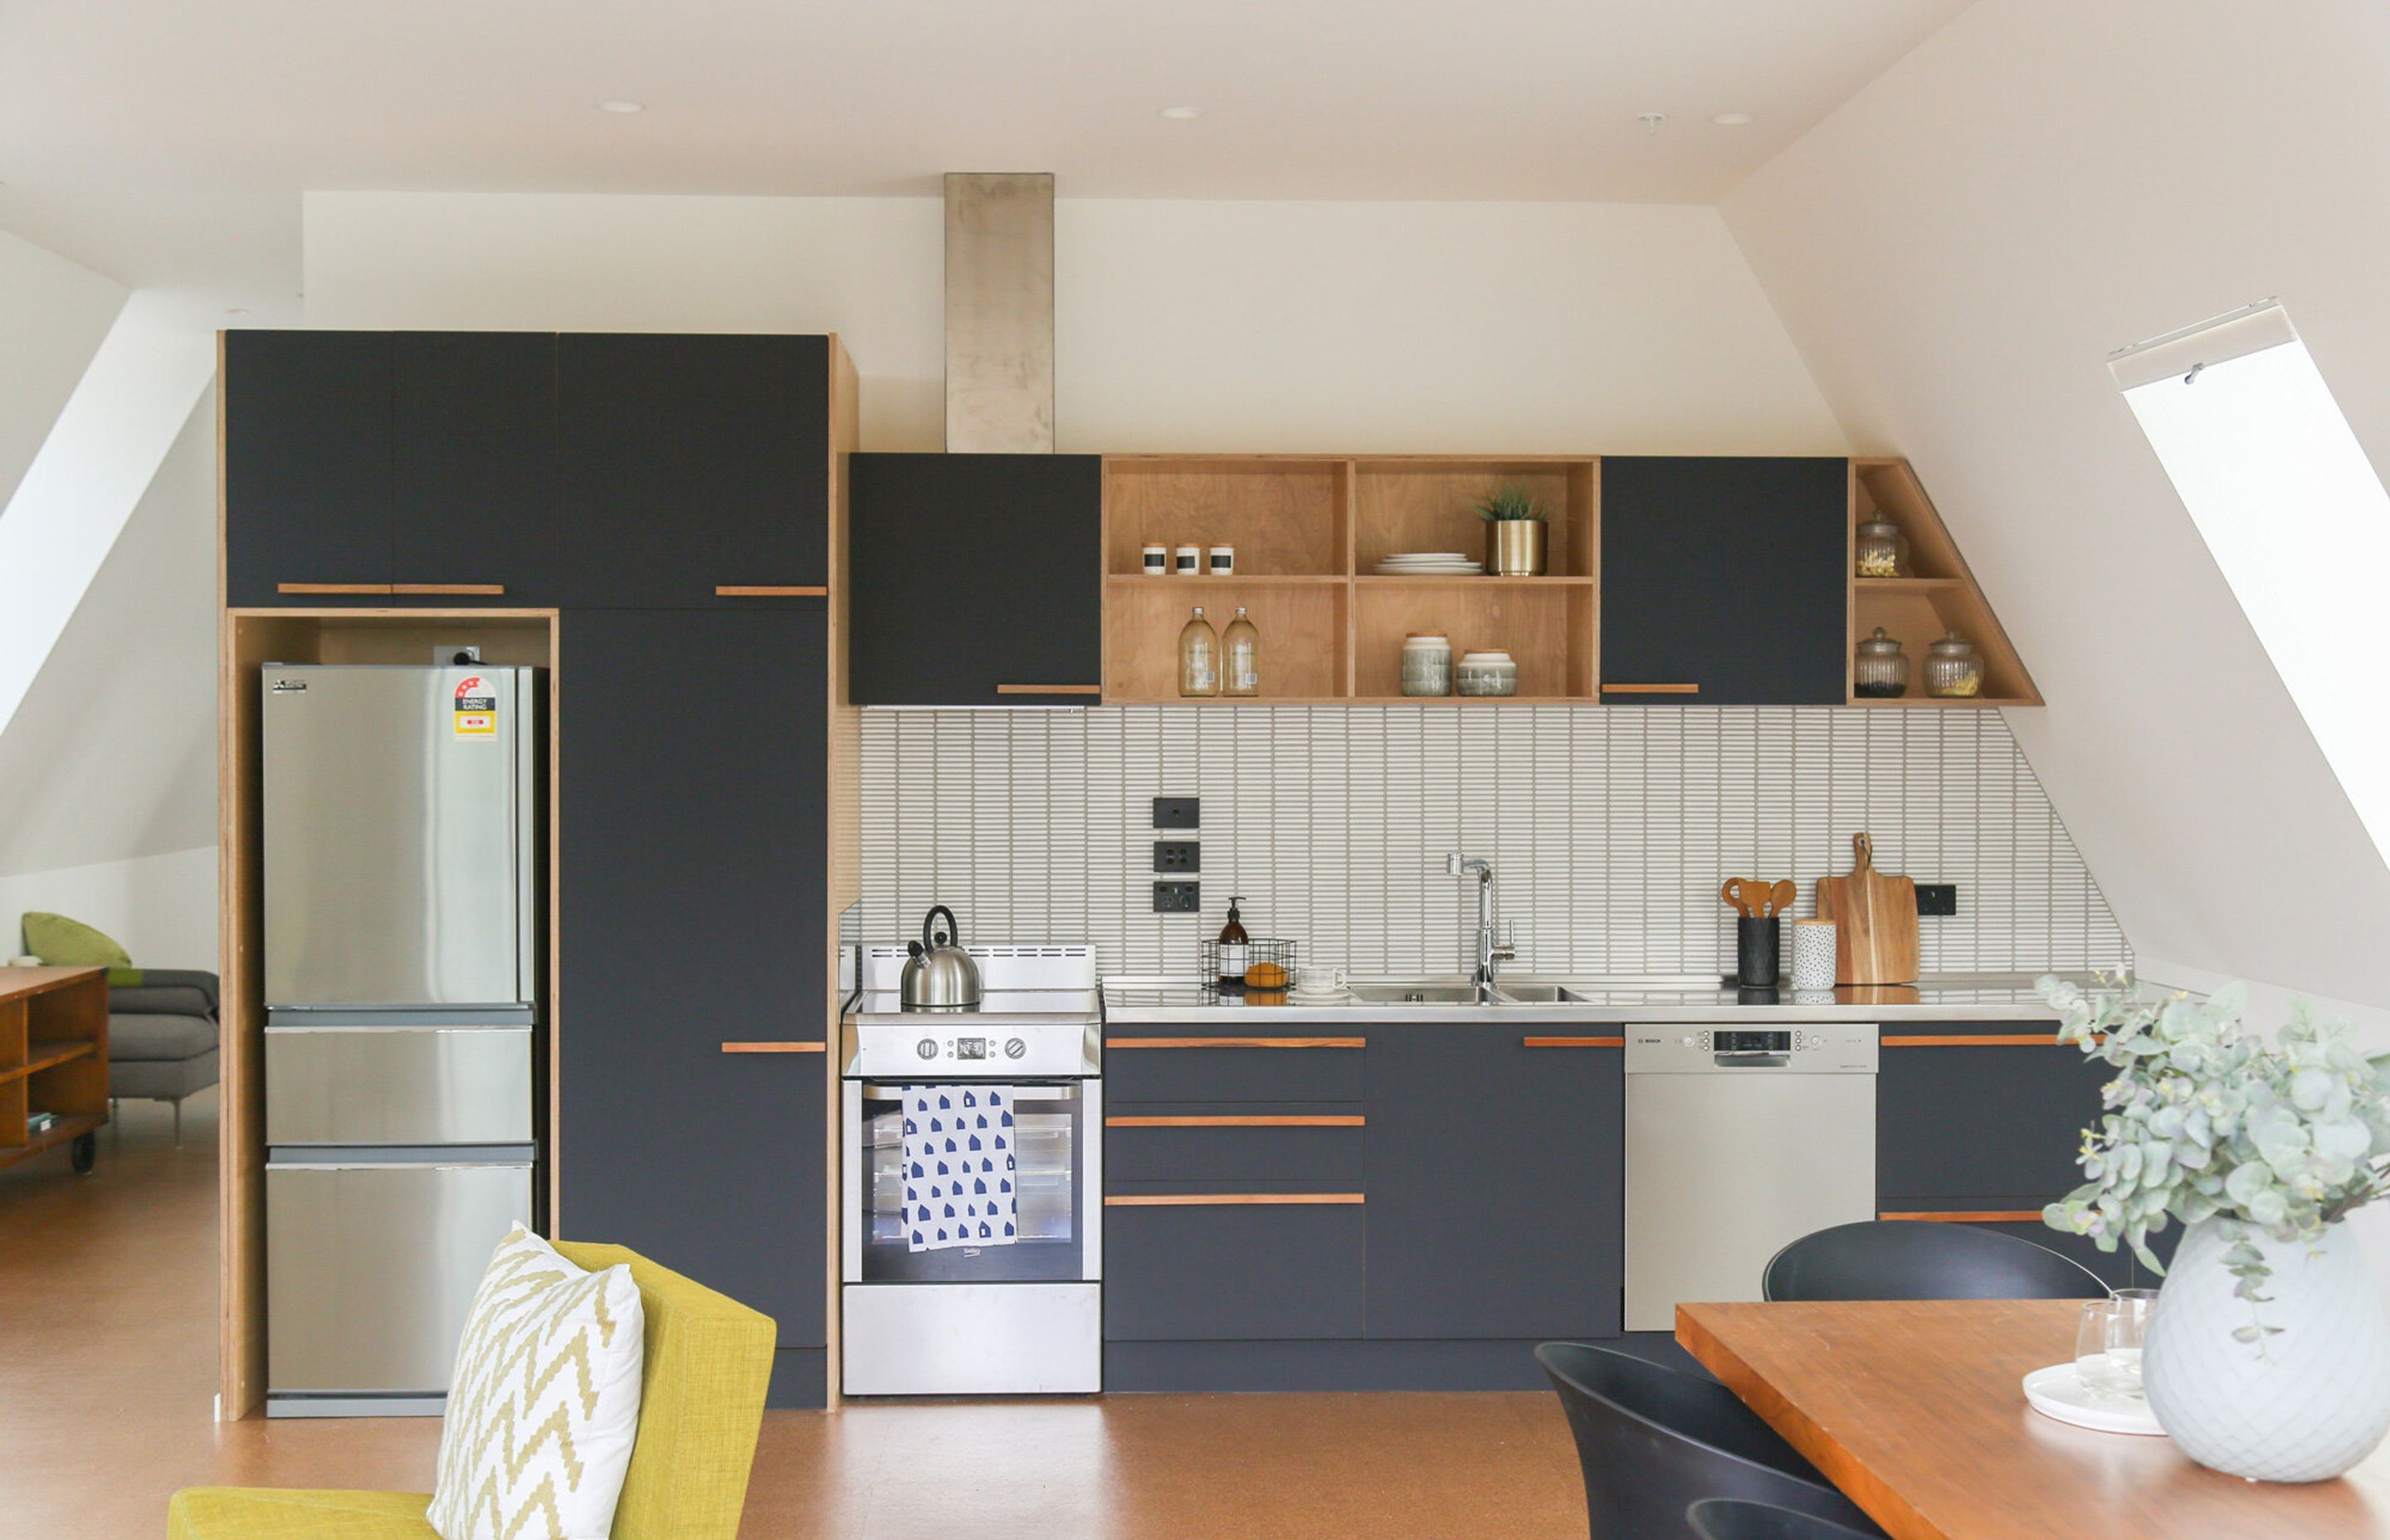 Polaris HPL panels from the Plytech Green range were used for the kitchen areas at the 26 Aroha project.